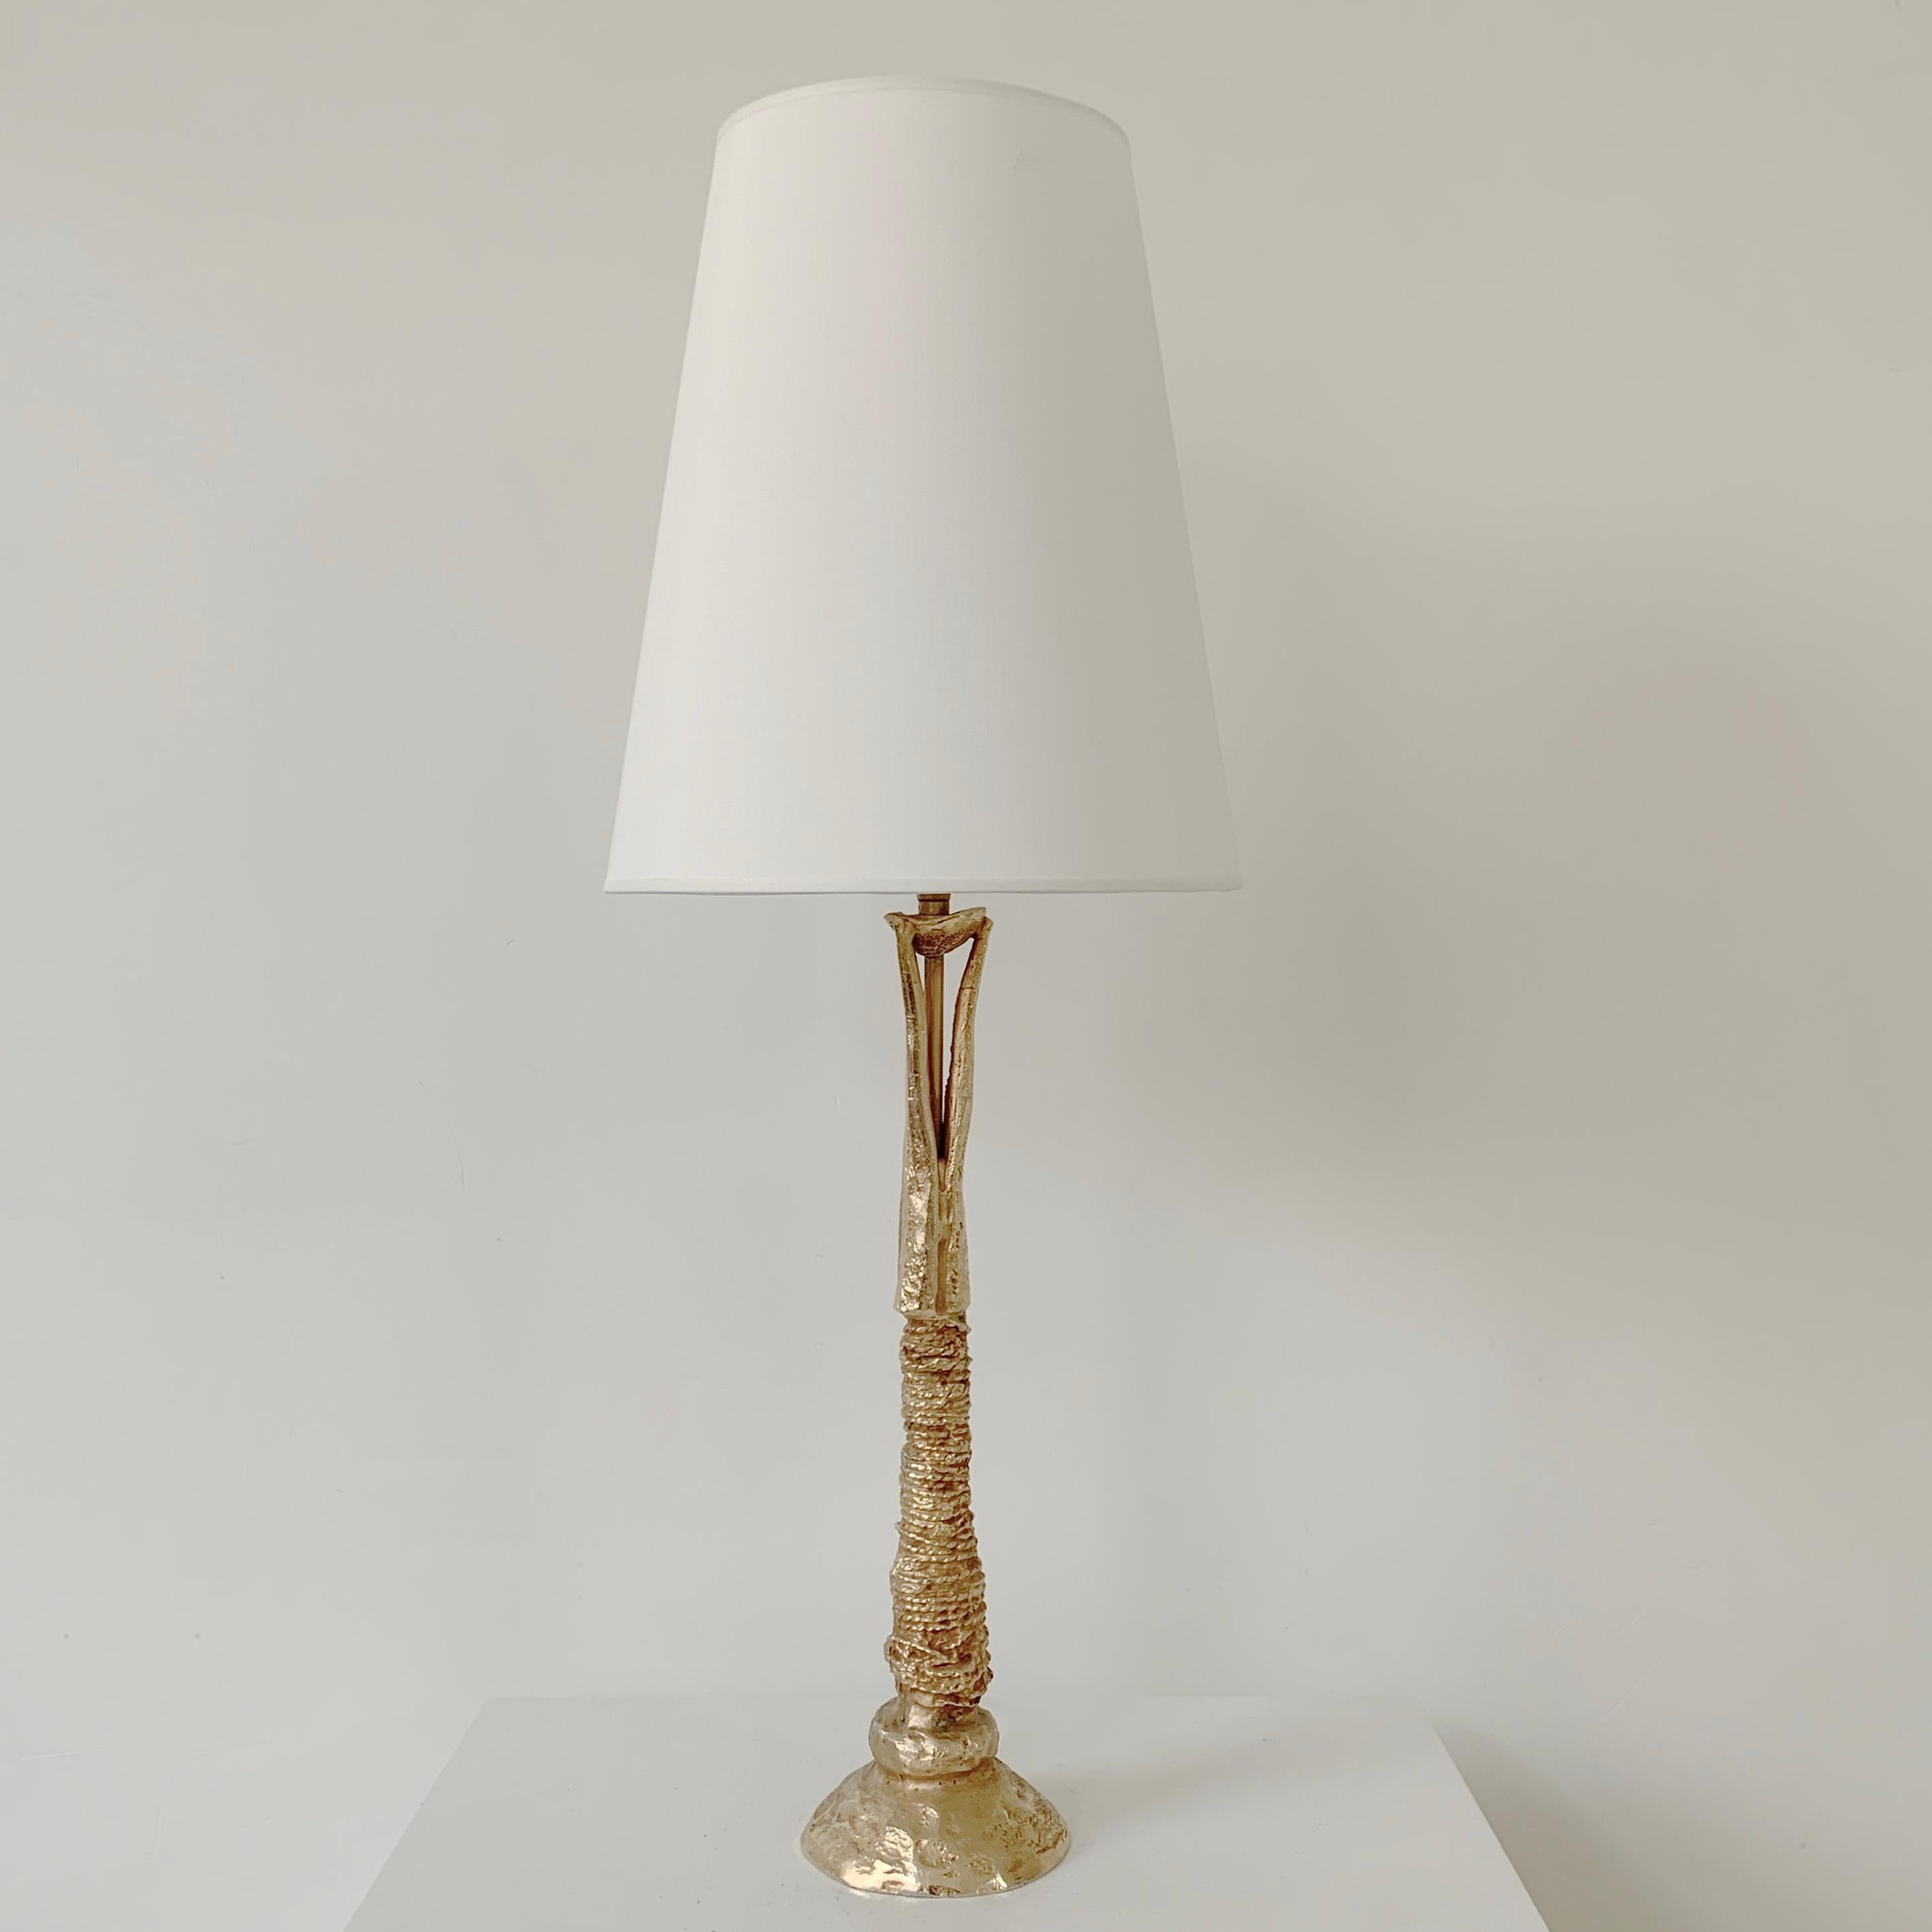 Sculptural table lamp by Pierre Casenove for Fondica, circa 1990, France.
Gilt bronze, new fabric shade.
Stamped Casenove Fondica France 94.
Nice model, rewired.
Dimensions: total height 69 cm, diameter of the shade: 26 cm.
All purchases are covered